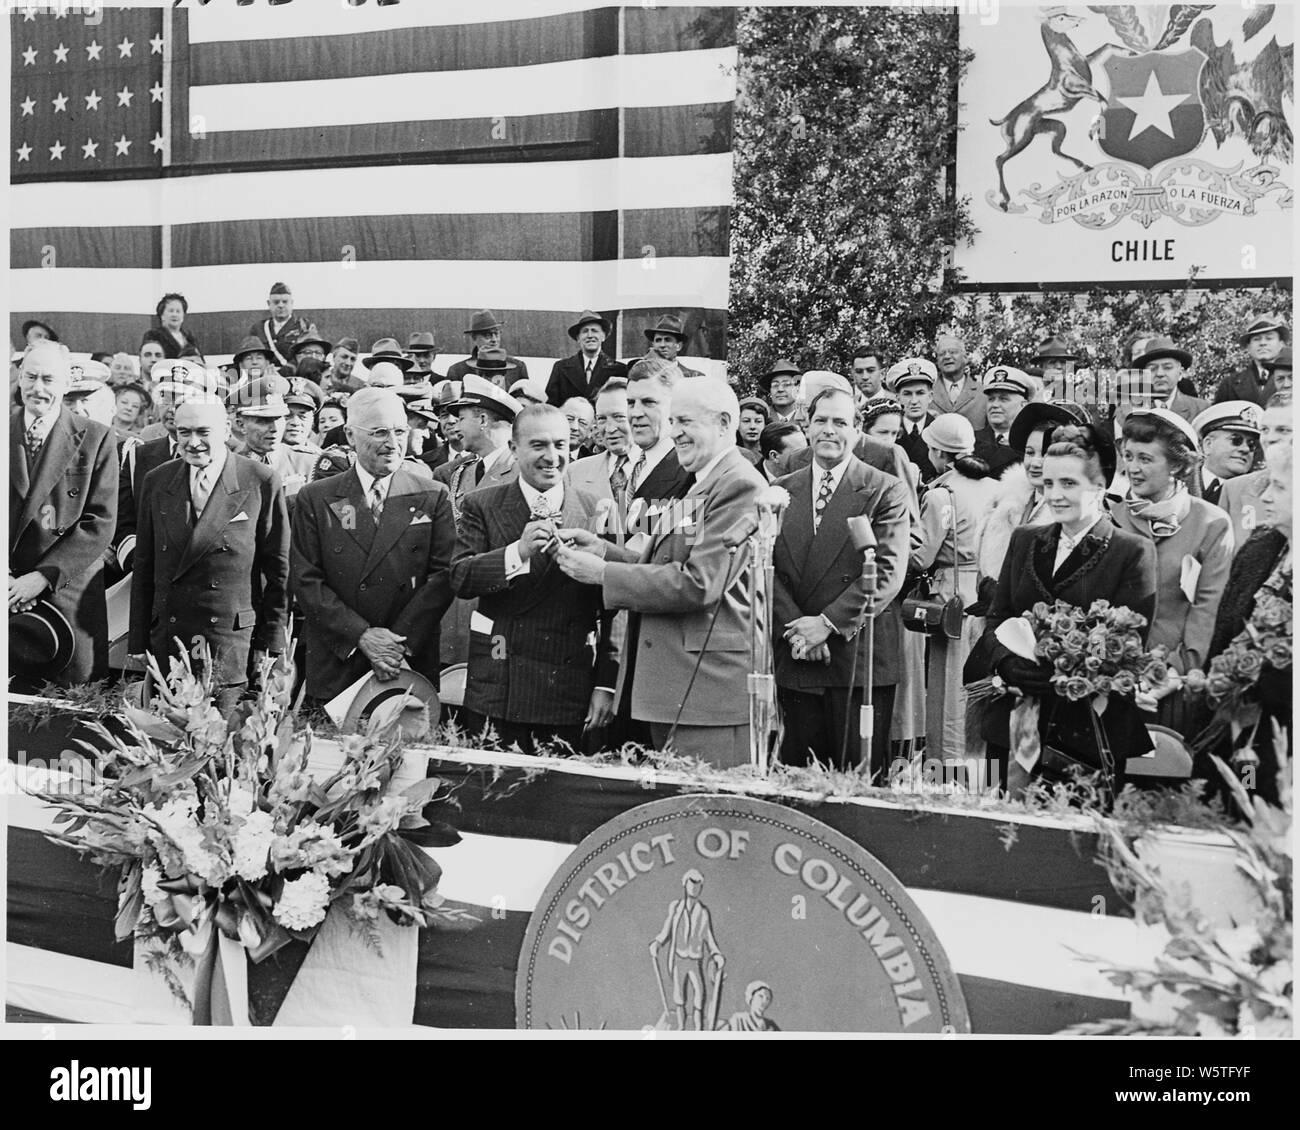 Photograph of Chilean President Gabriel Gonzalez Videla receiving the key to the city during his visit to Washington, as President Truman and other dignitaries look on. Stock Photo